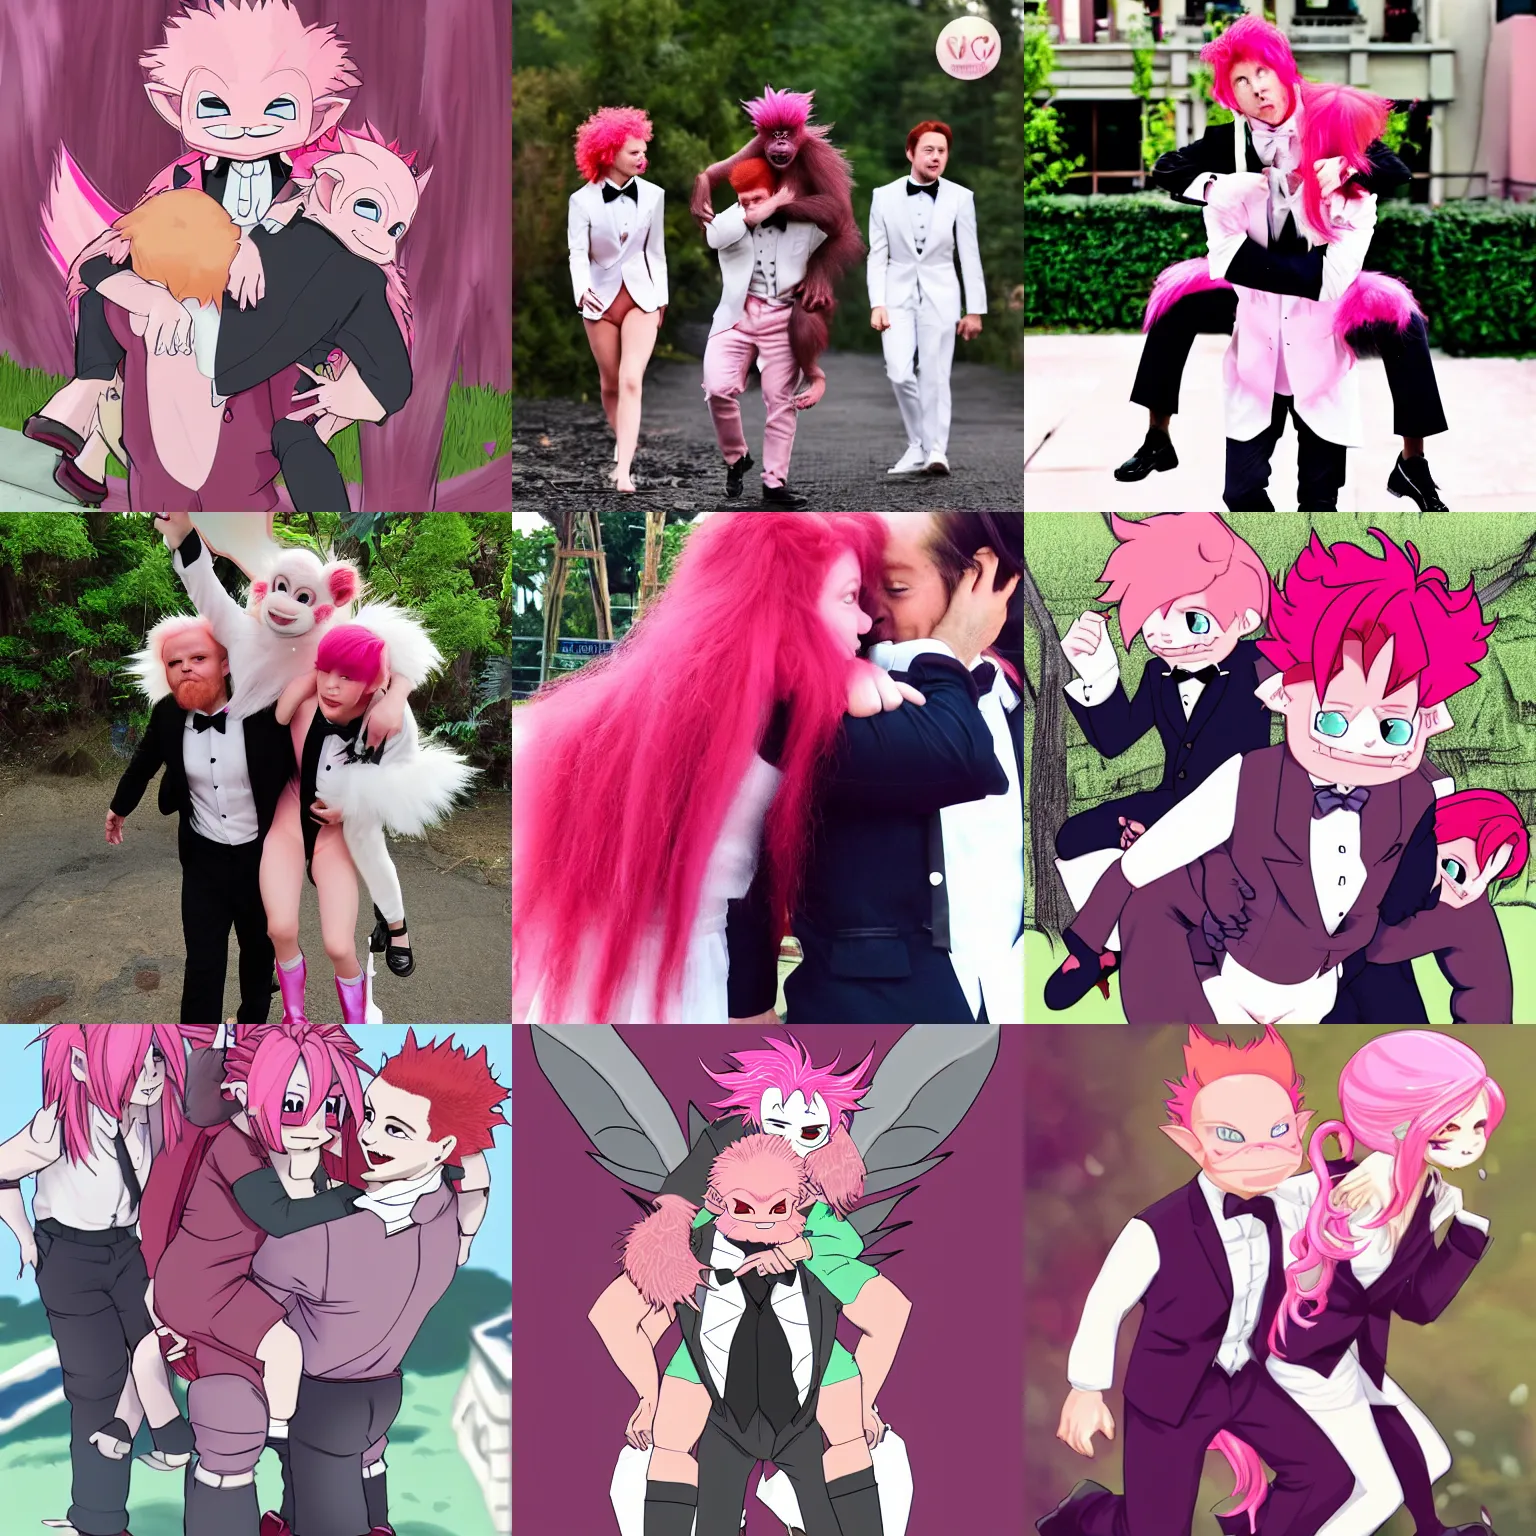 Prompt: smol pink haired gremlin fairy demon piggybacking redhaired ape sasquatch with white tuxedo